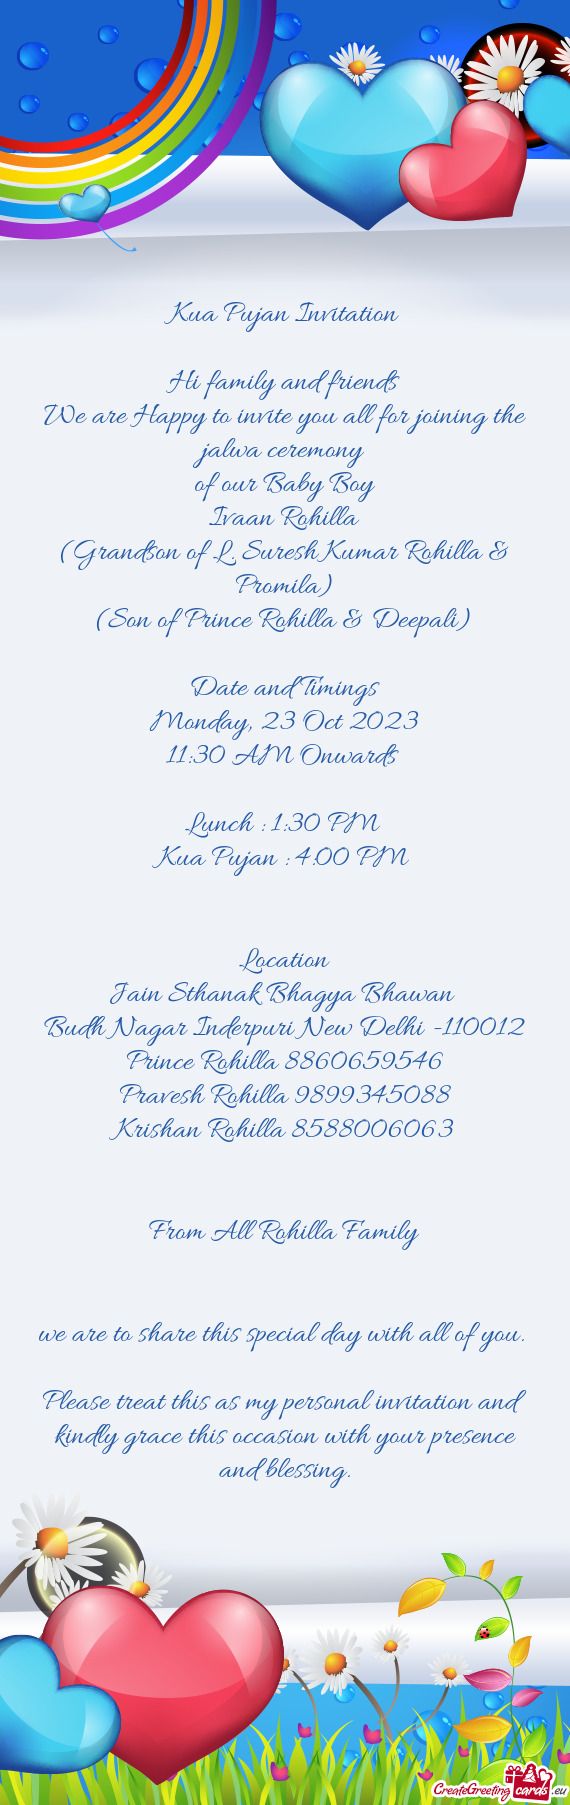 Date and Timings